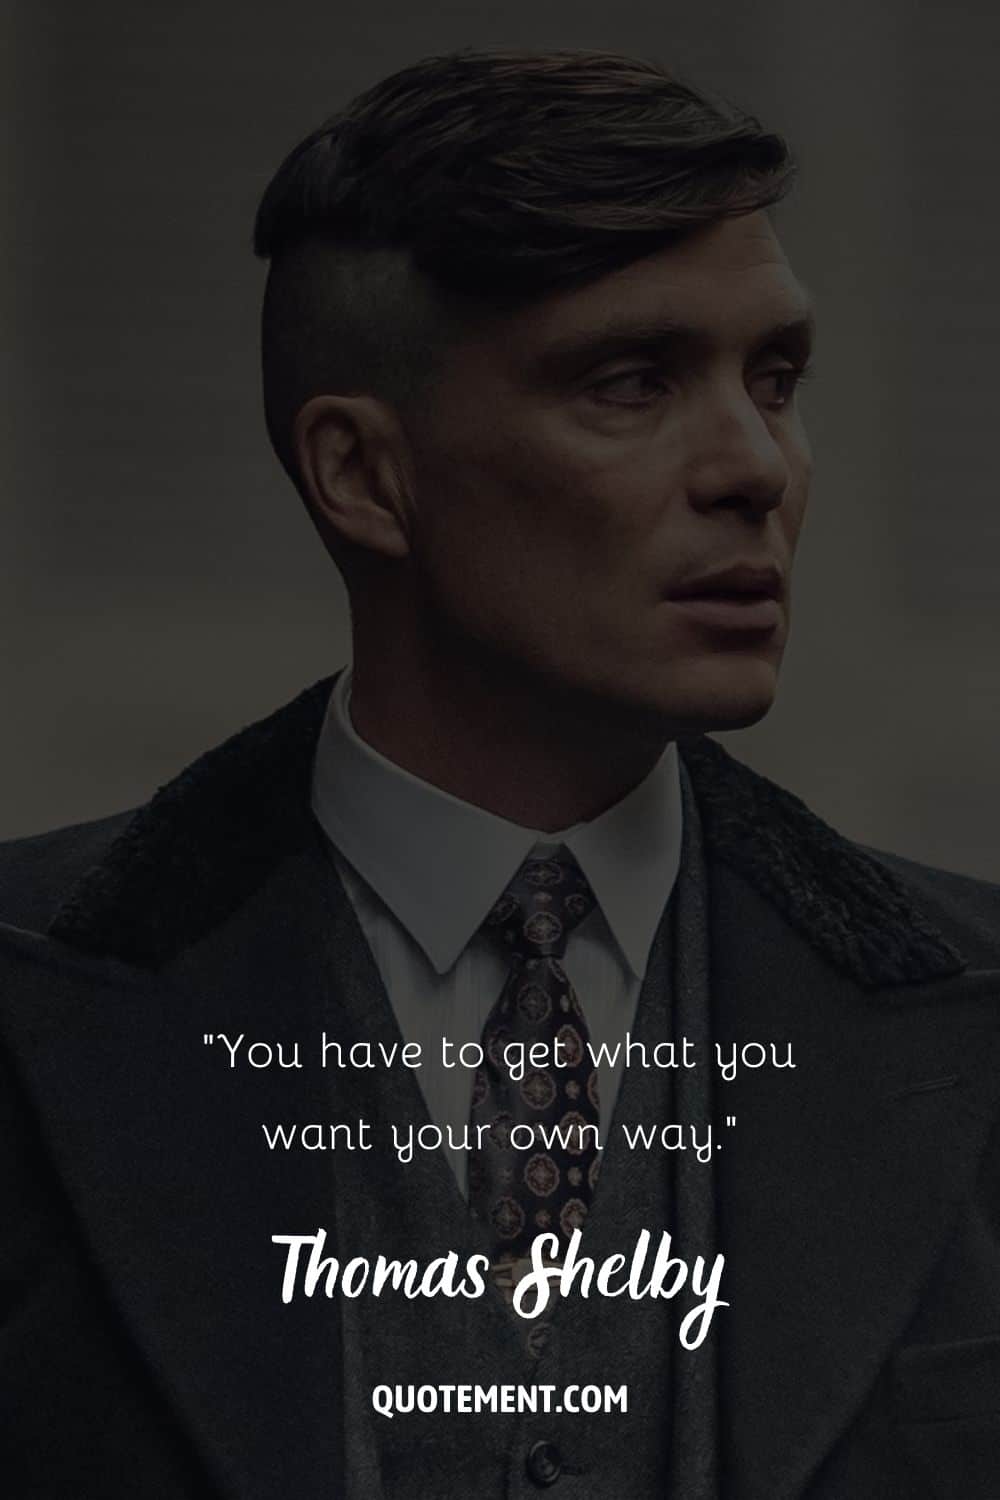 Cillian Murphy exudes charm representing best Thomas Shelby quote